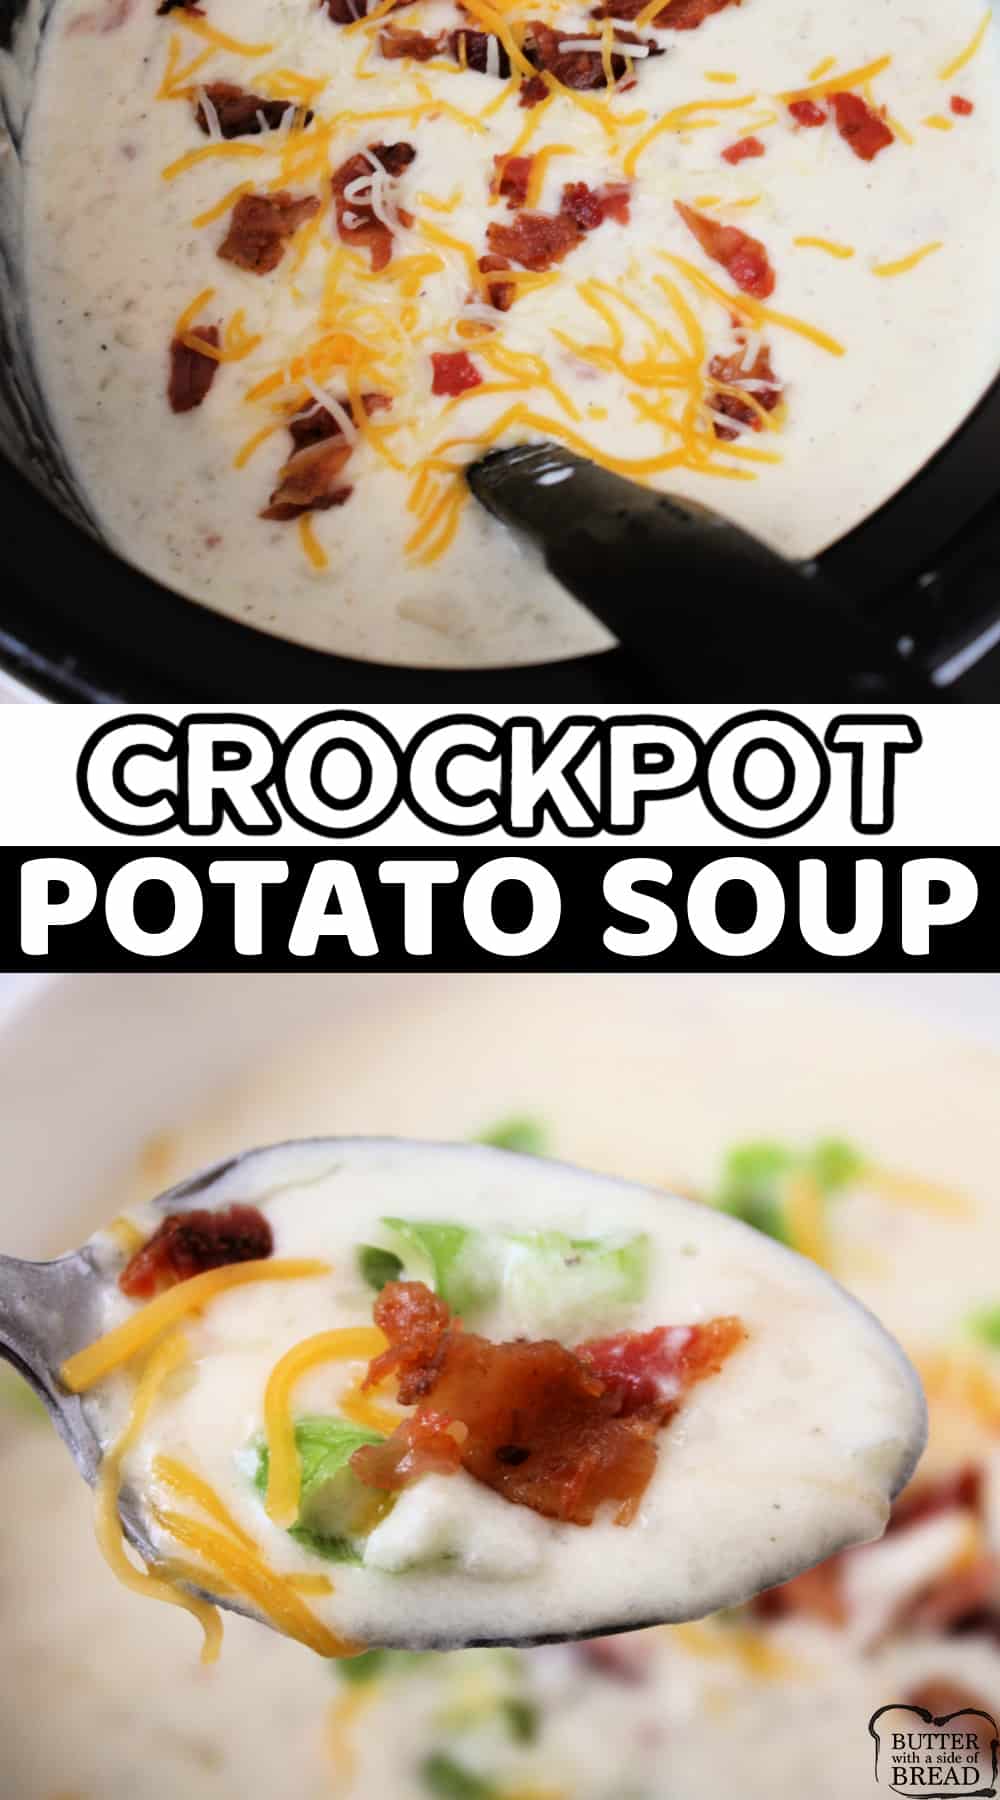 Crockpot Potato Soup is rich, creamy and cheesy and perfect for a chilly day. Delicious slow cooker potato soup recipe that is simple to make!